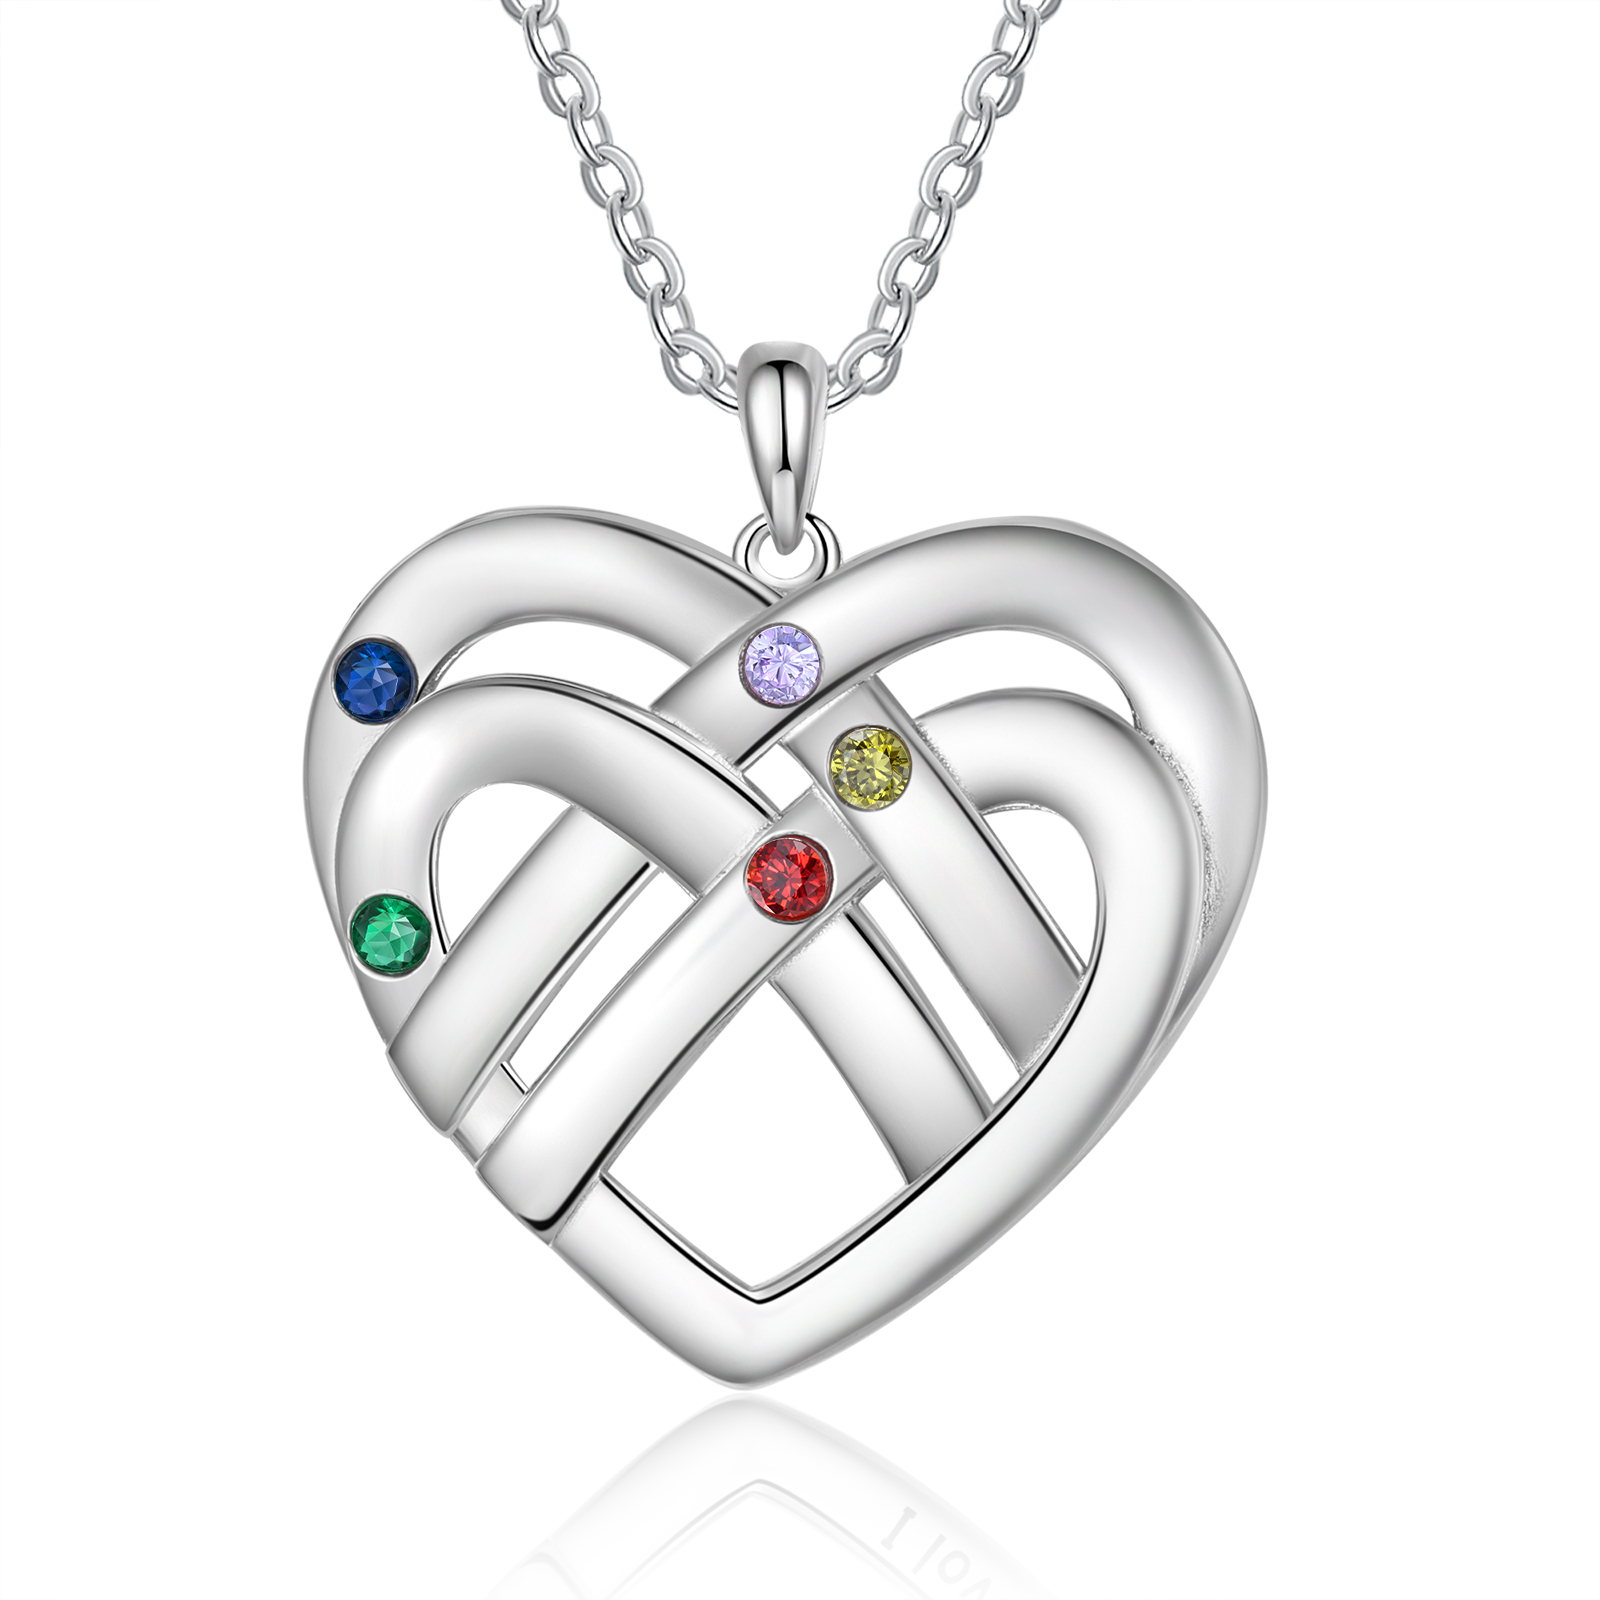 5 Names - Personalized Double Layer Heart Necklace with Custom Name and Birthstone, As a Mother's Day Gift for Mom